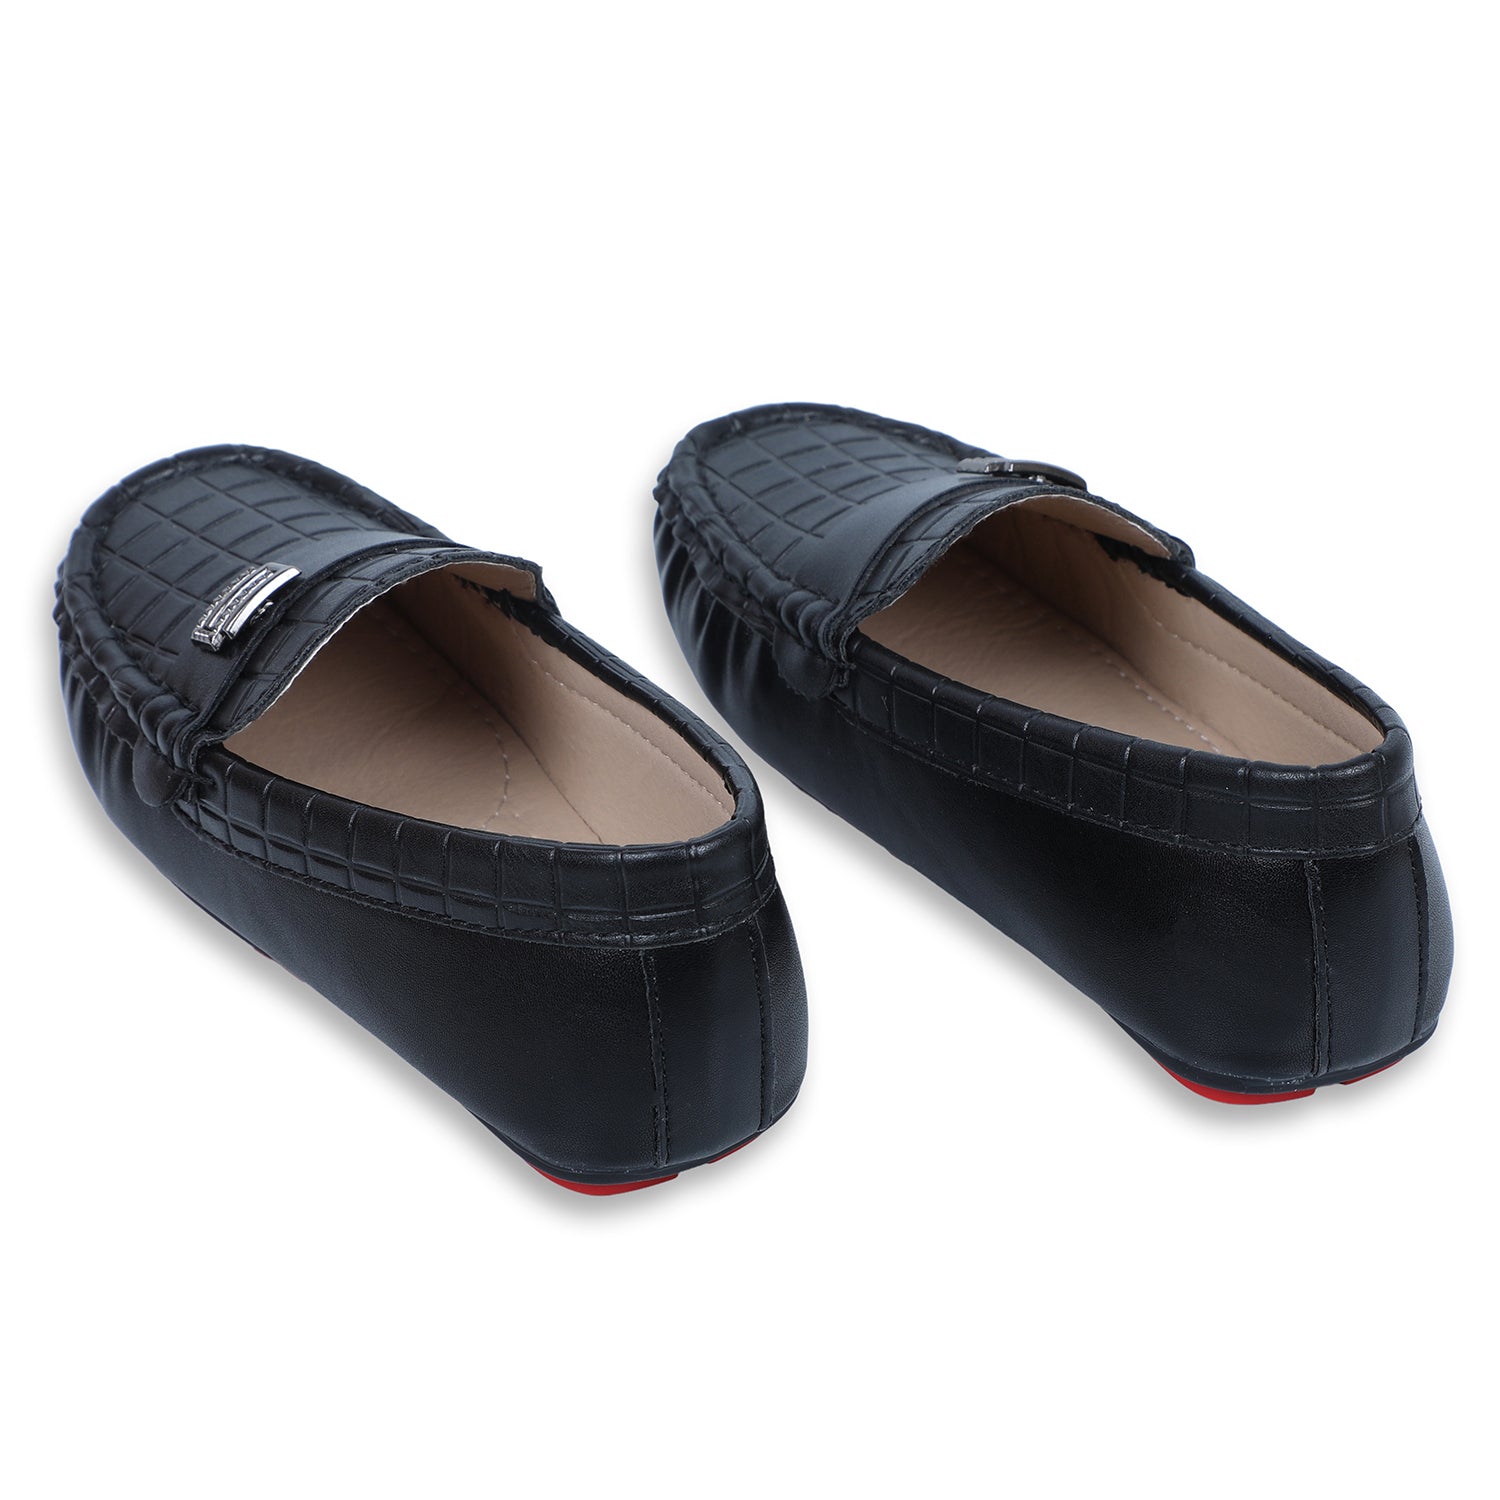 Baby Moo x Bash Kids Embossed Leatherite Loafer Shoes - Black